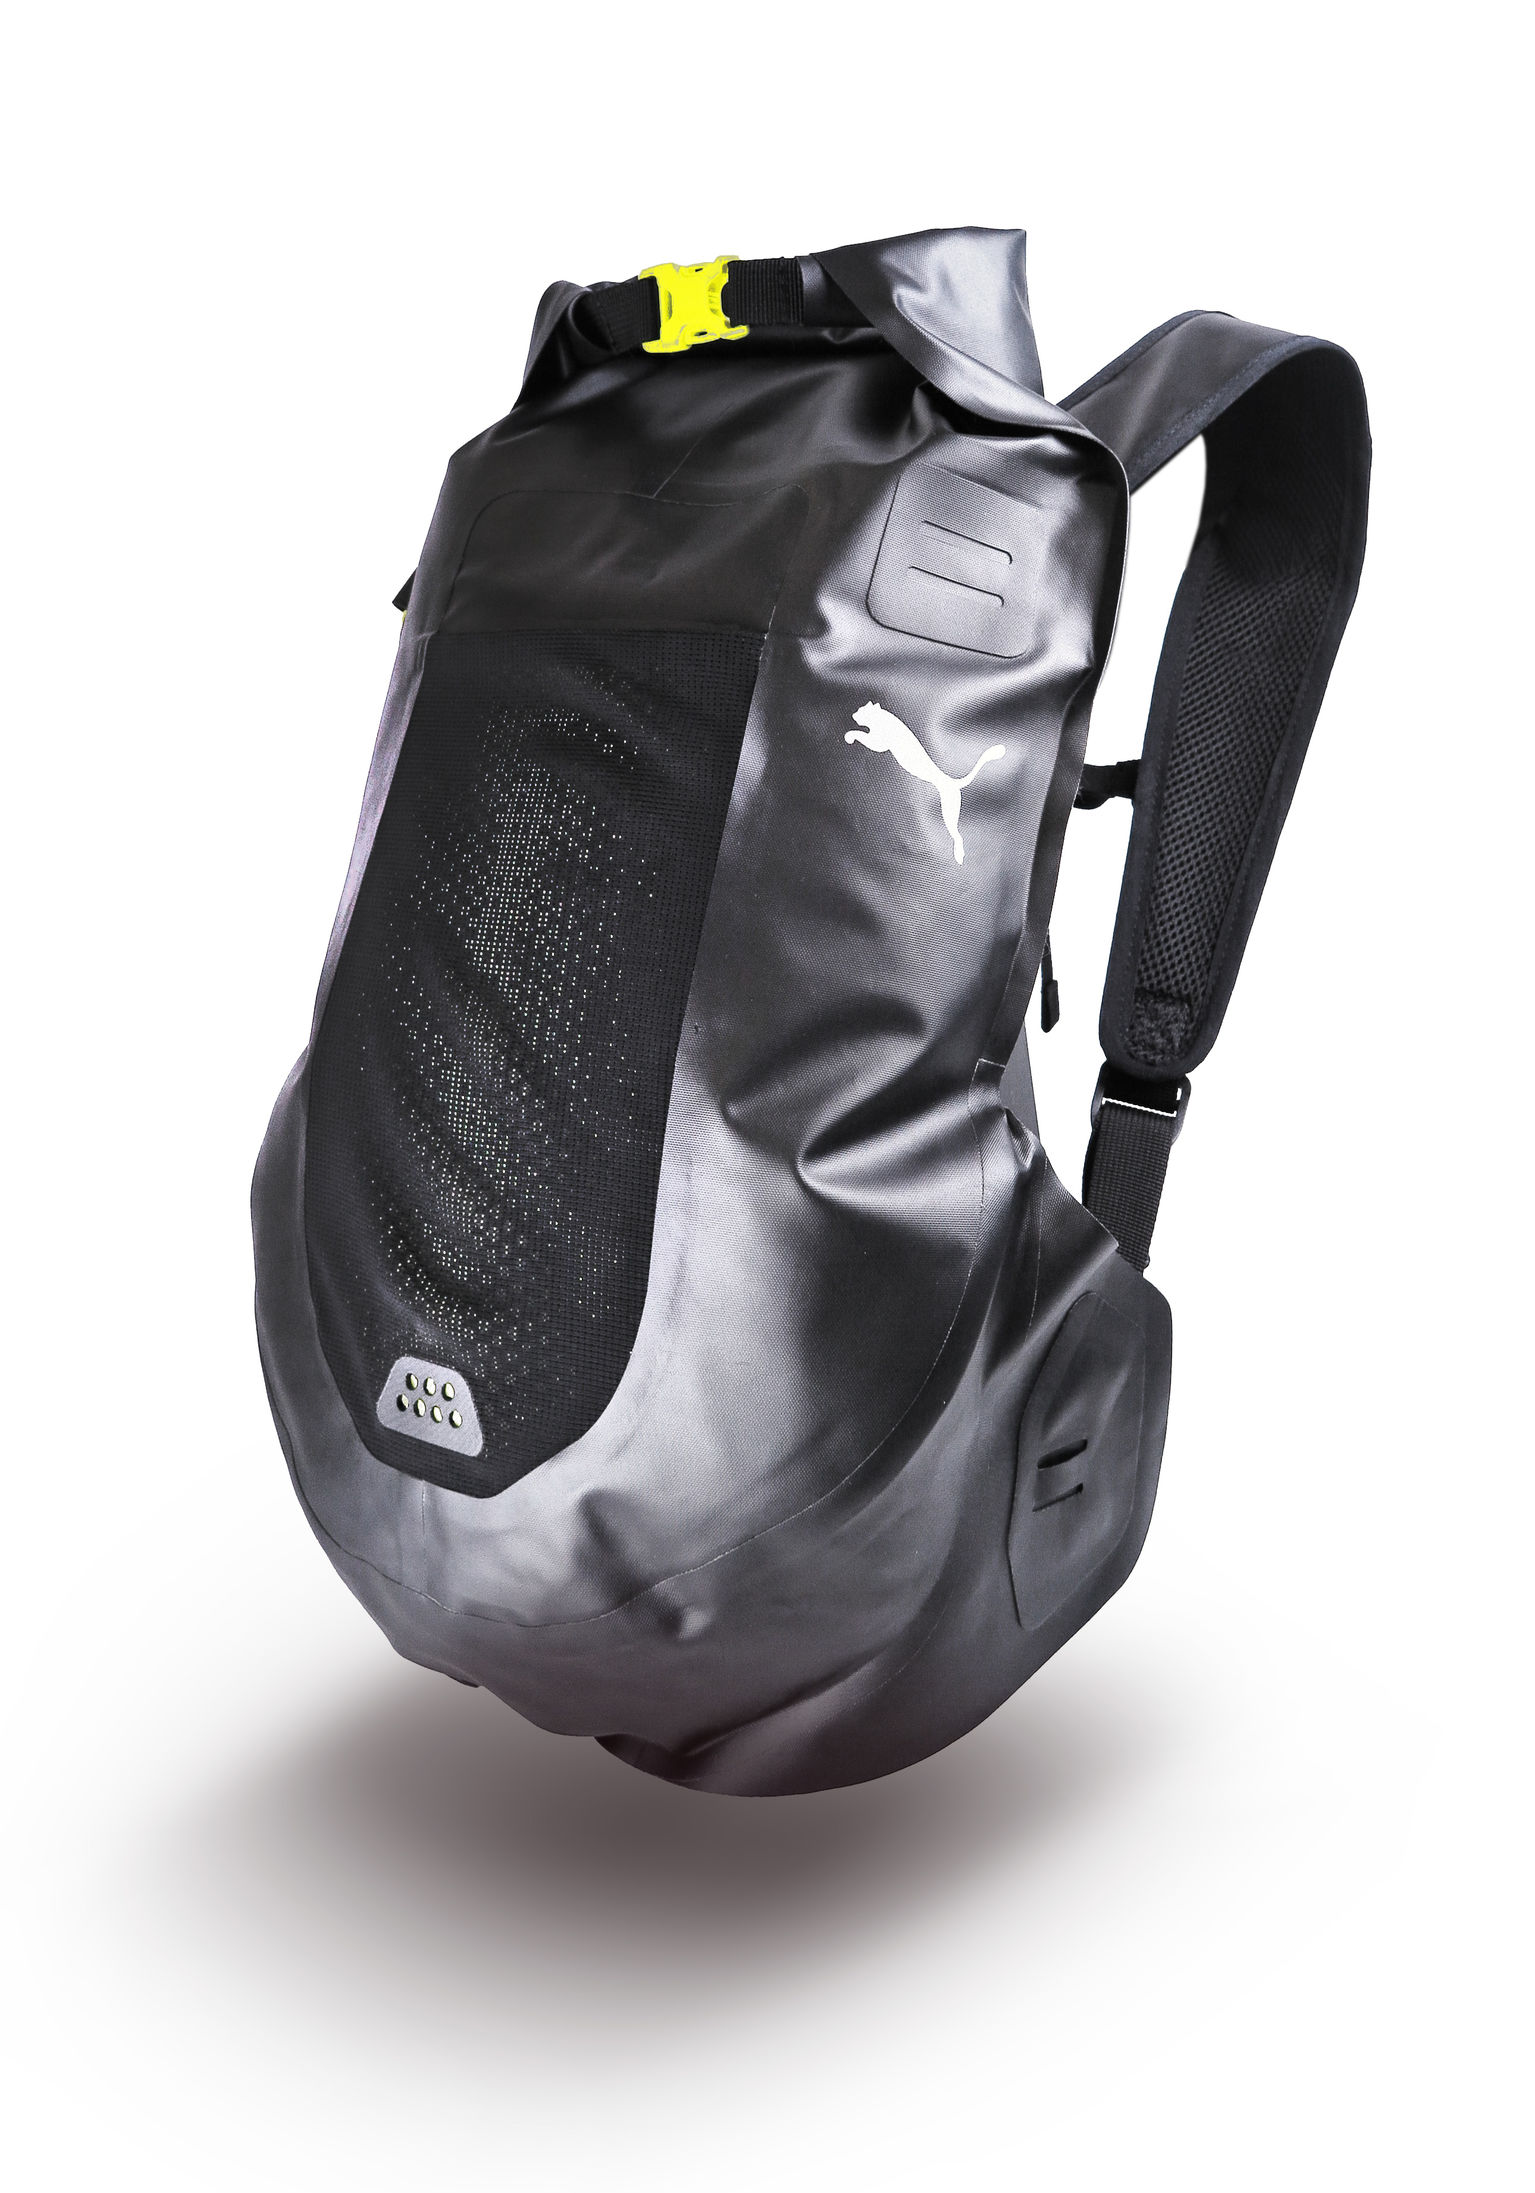 Winterized Backpack | iF WORLD DESIGN GUIDE